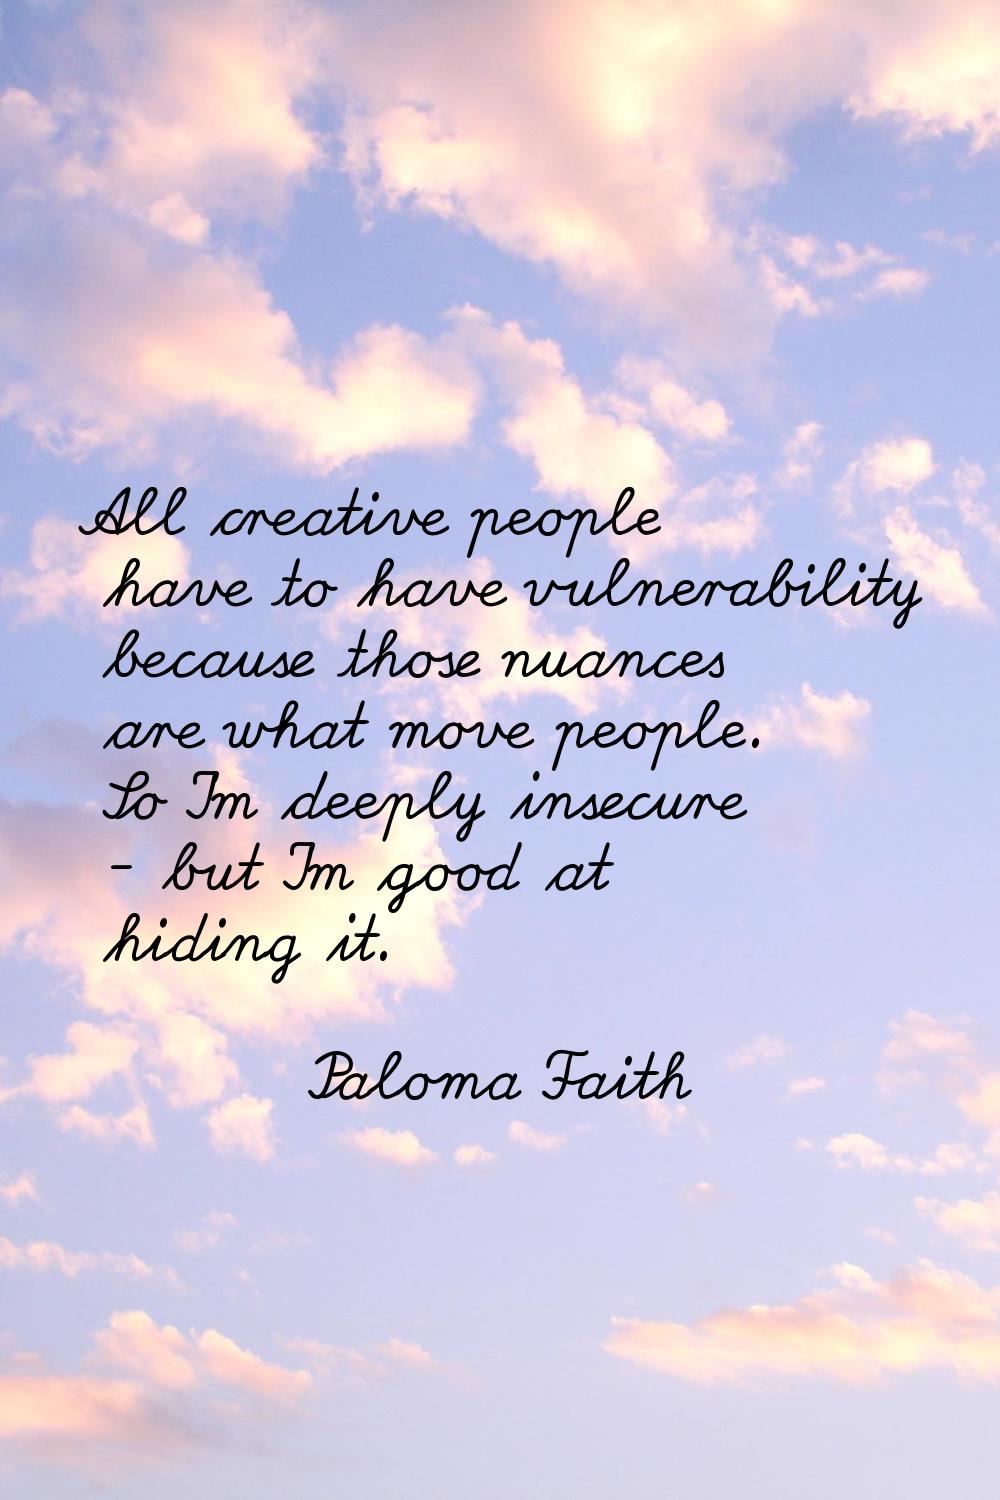 All creative people have to have vulnerability because those nuances are what move people. So I'm d